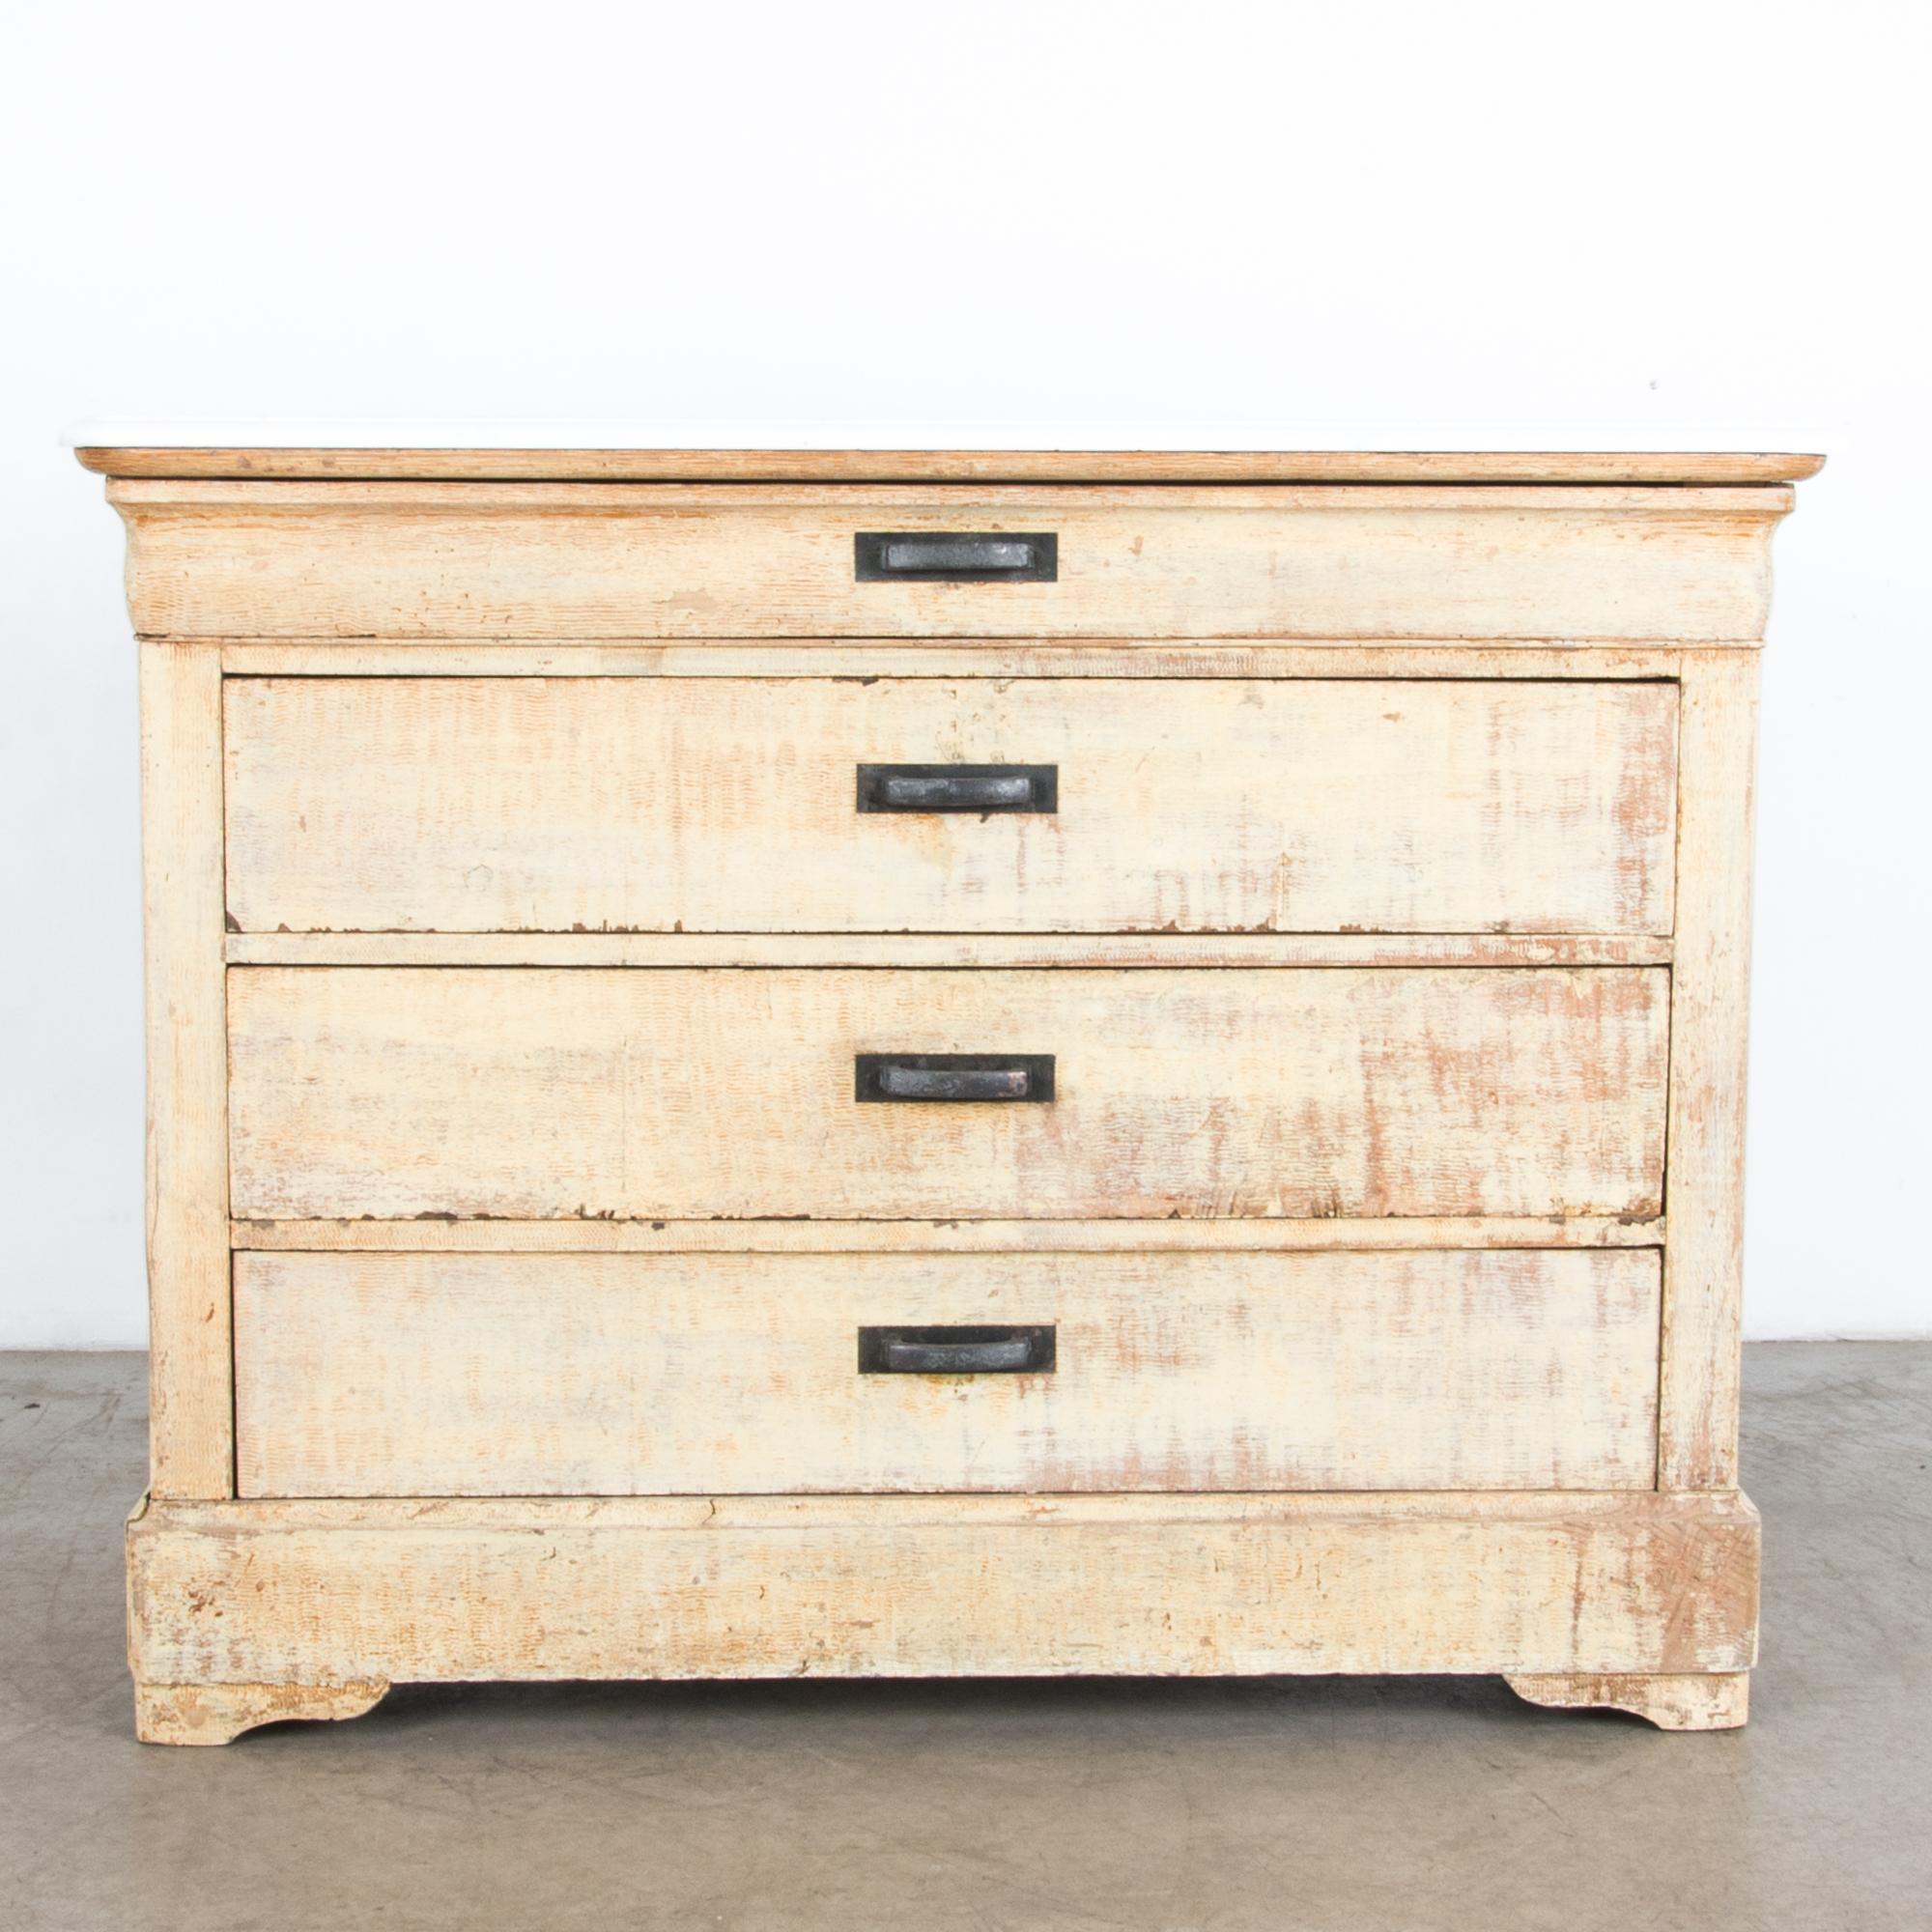 A sleek and simple chest of drawers from France circa 1880 in oak, with a unique textured patina and a white and grey marble top. A four drawer design blends with the distinctive Louis Phillipe shape, with a thick base moulding and feet, the top